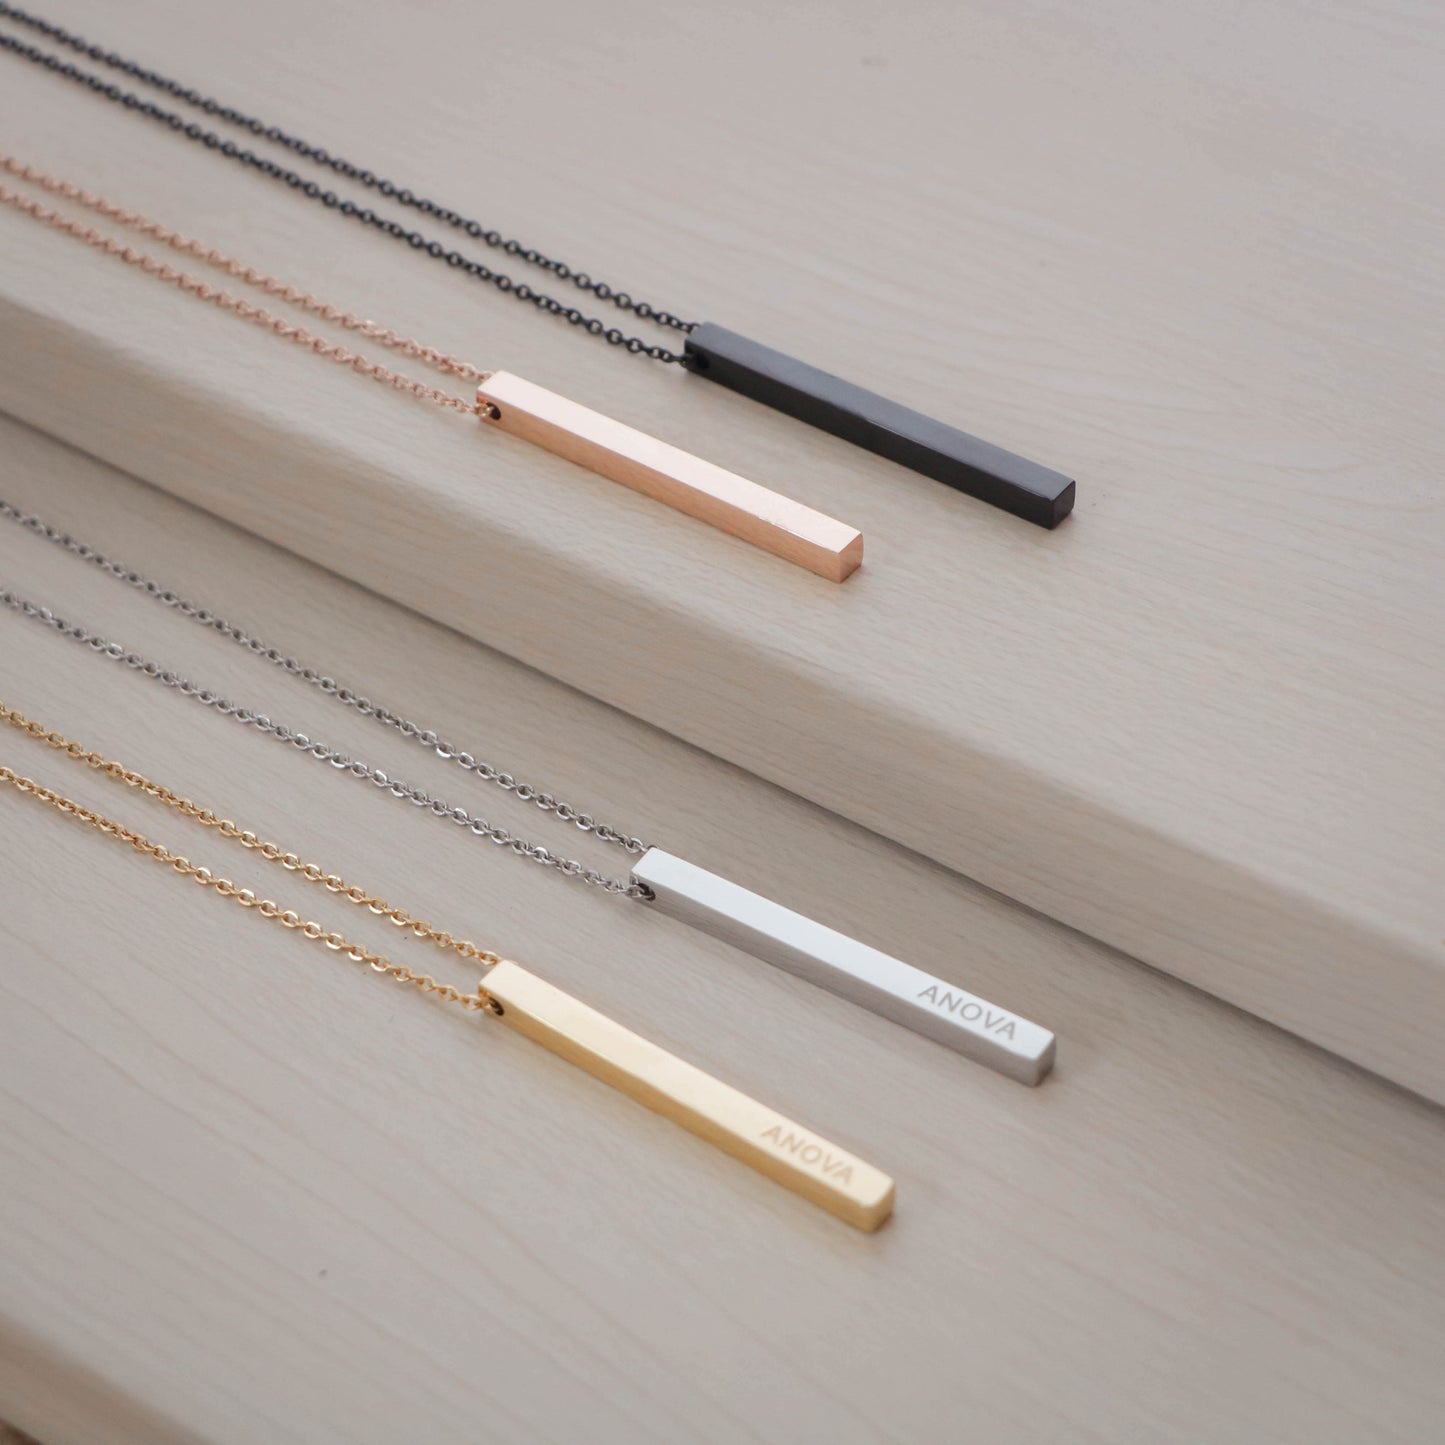 Cura Te Ipsum "Take Care of Yourself" Bar Necklace